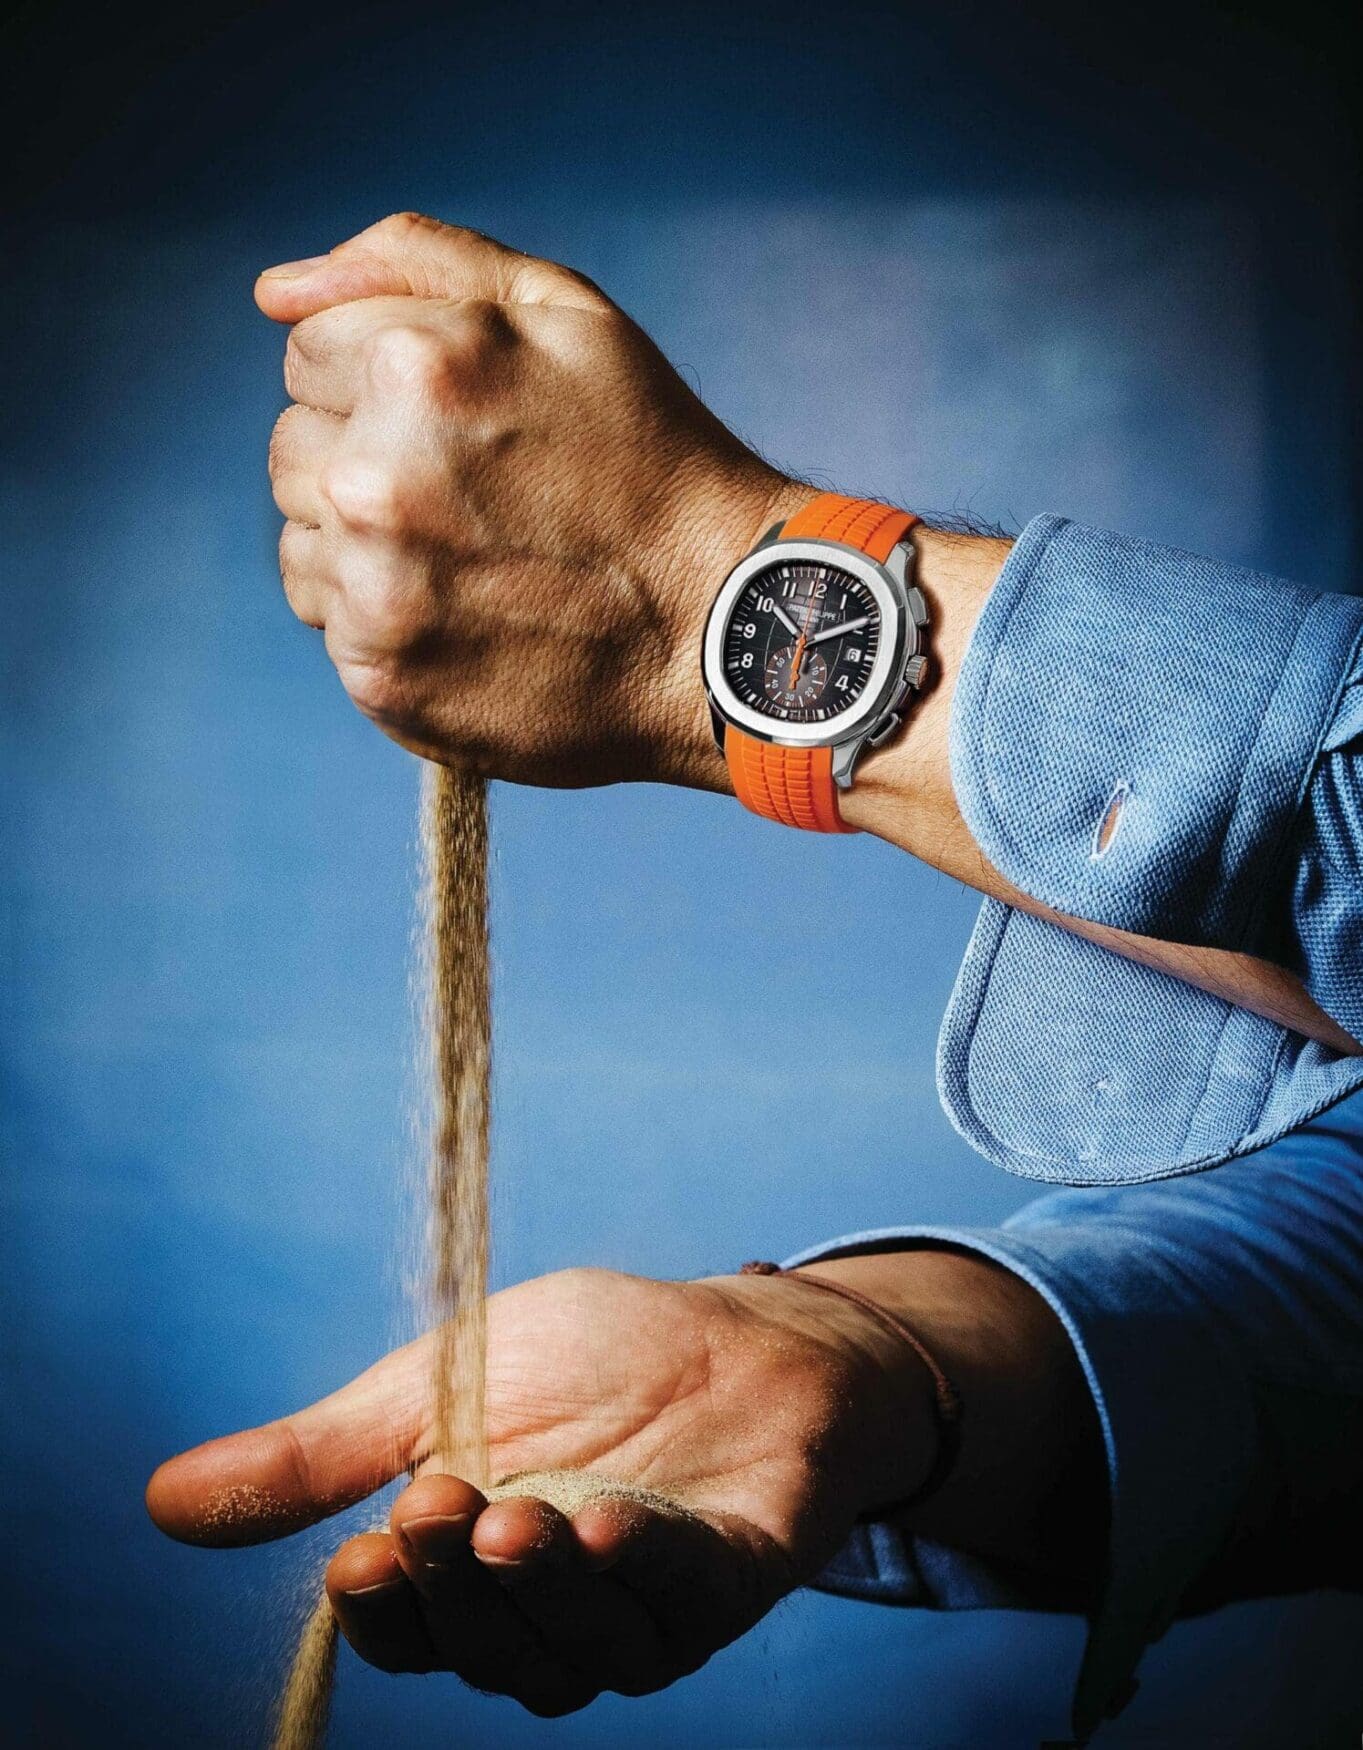 You’re not the only one whose grail watch is on a rubber strap. Here are 5 of the most desirable